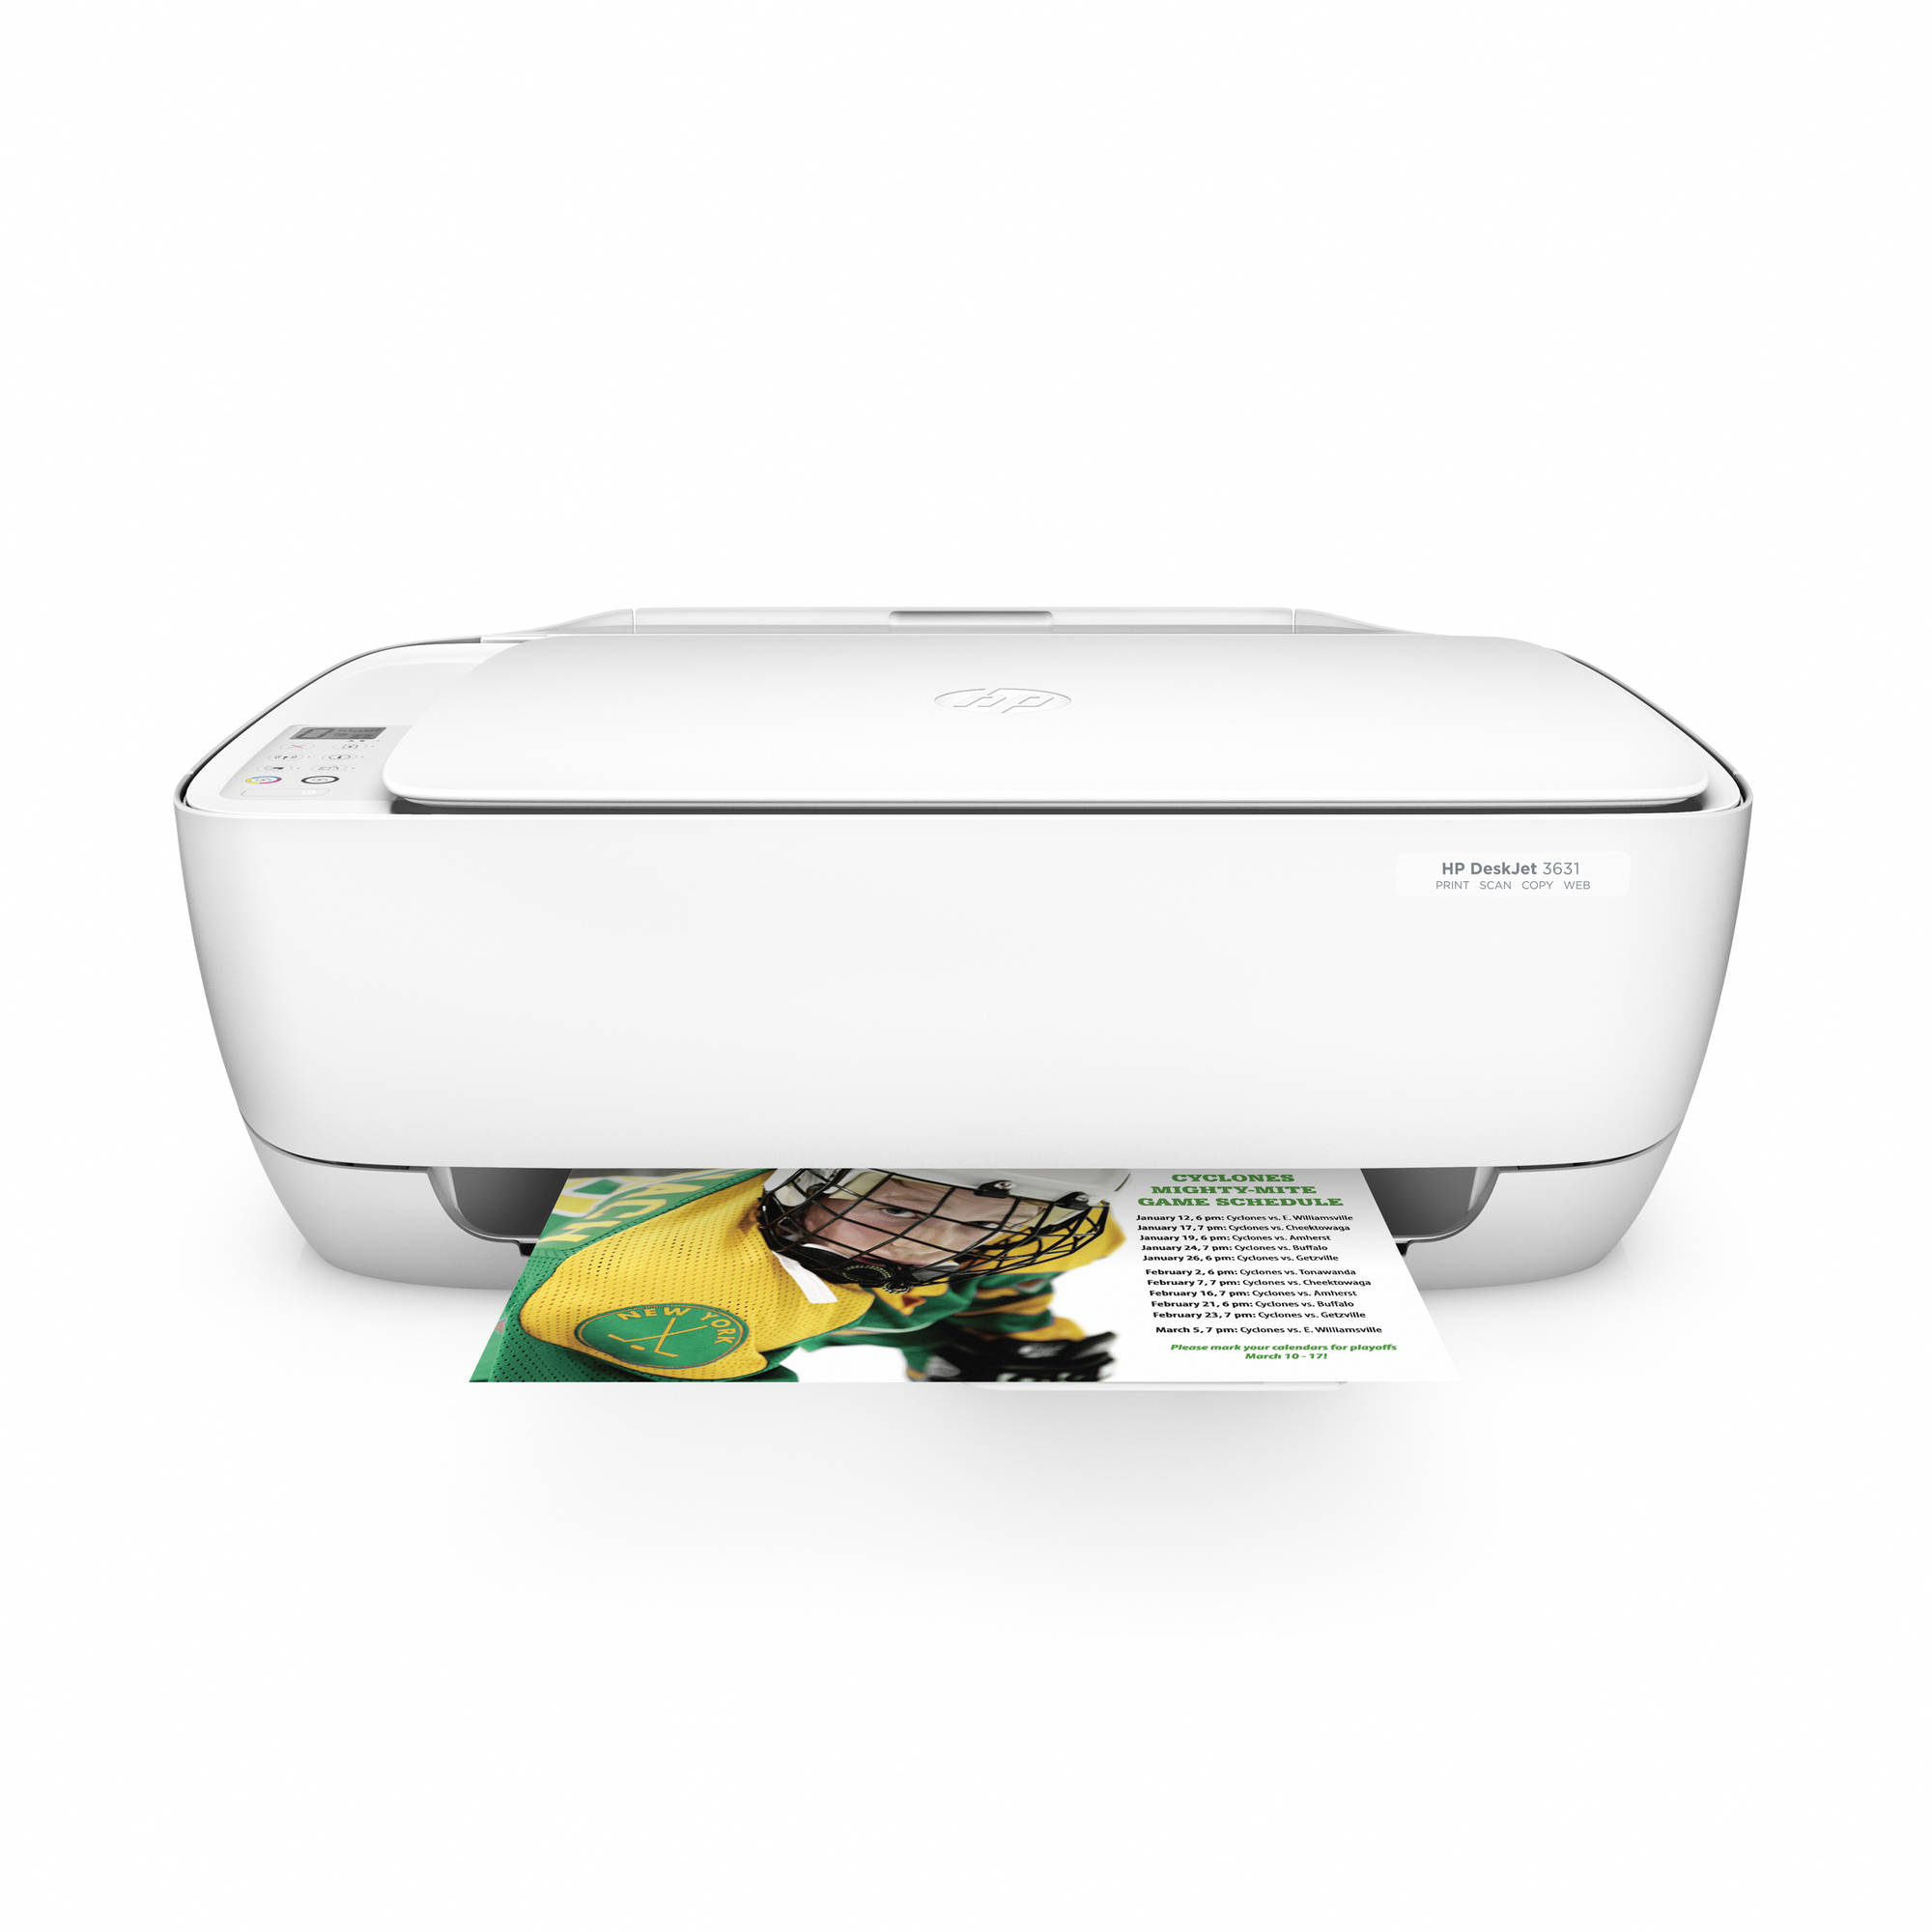 HP DeskJet 3631 All-in-One Compact Printer with Wireless Printing (K4T94A) - image 1 of 13